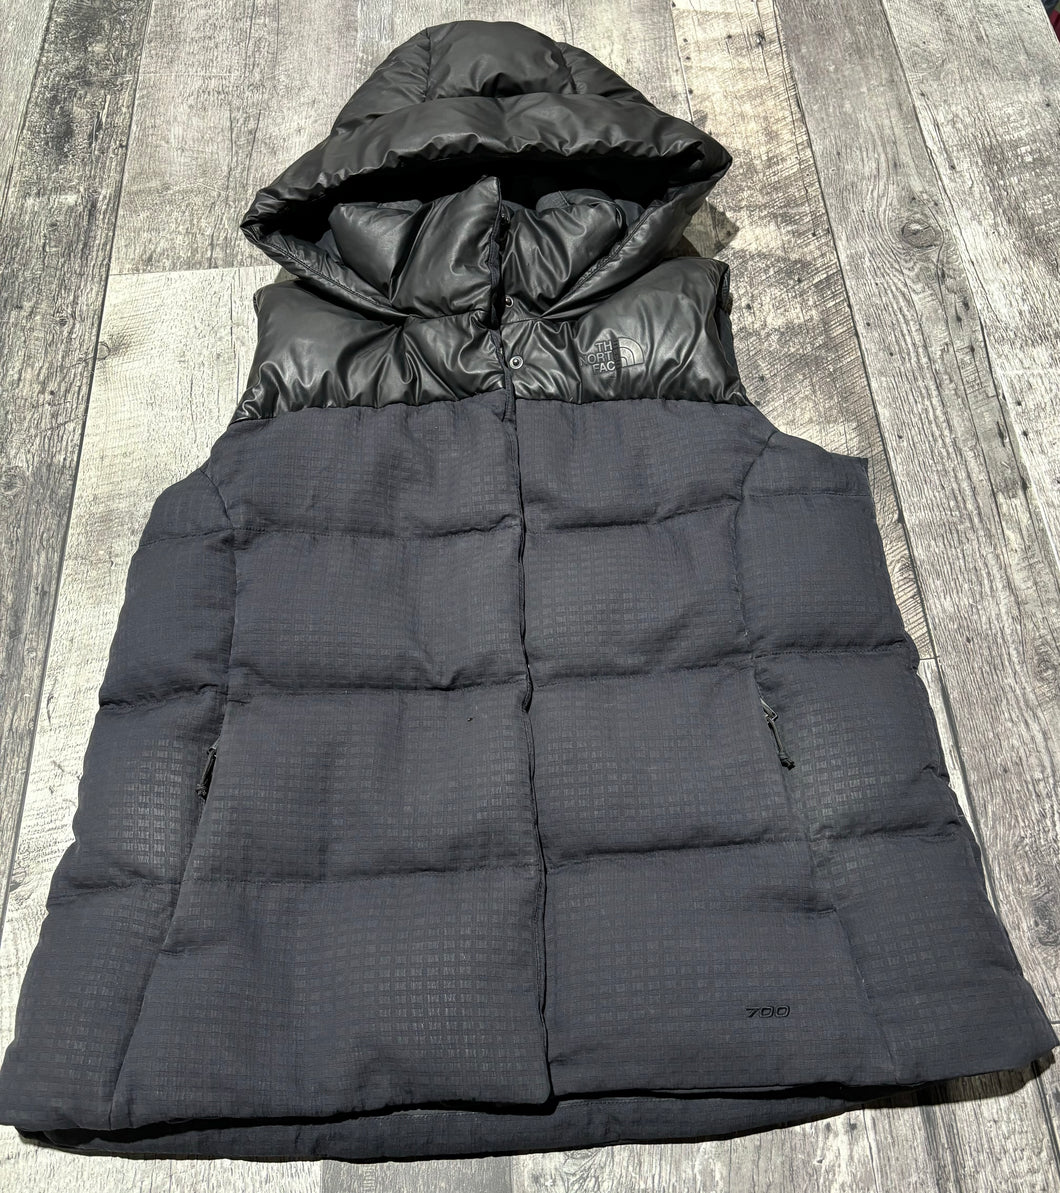 The North Face black vest - Hers size M